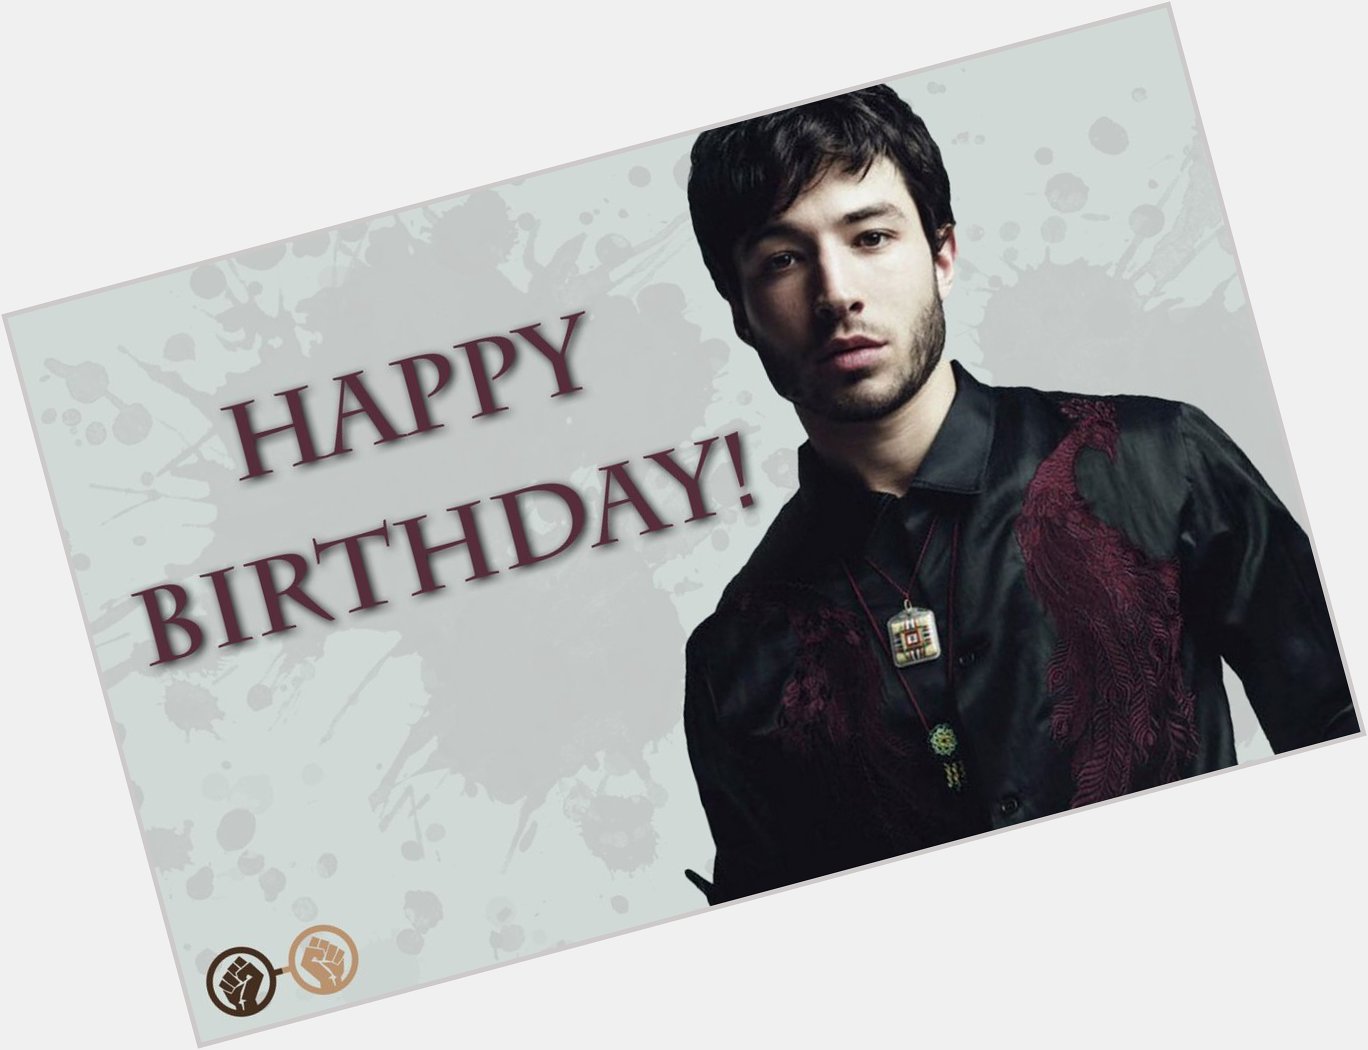 Happy birthday, Ezra Miller! Our favourite speedster turns 26 today. We hope he\s having an amazing day! 